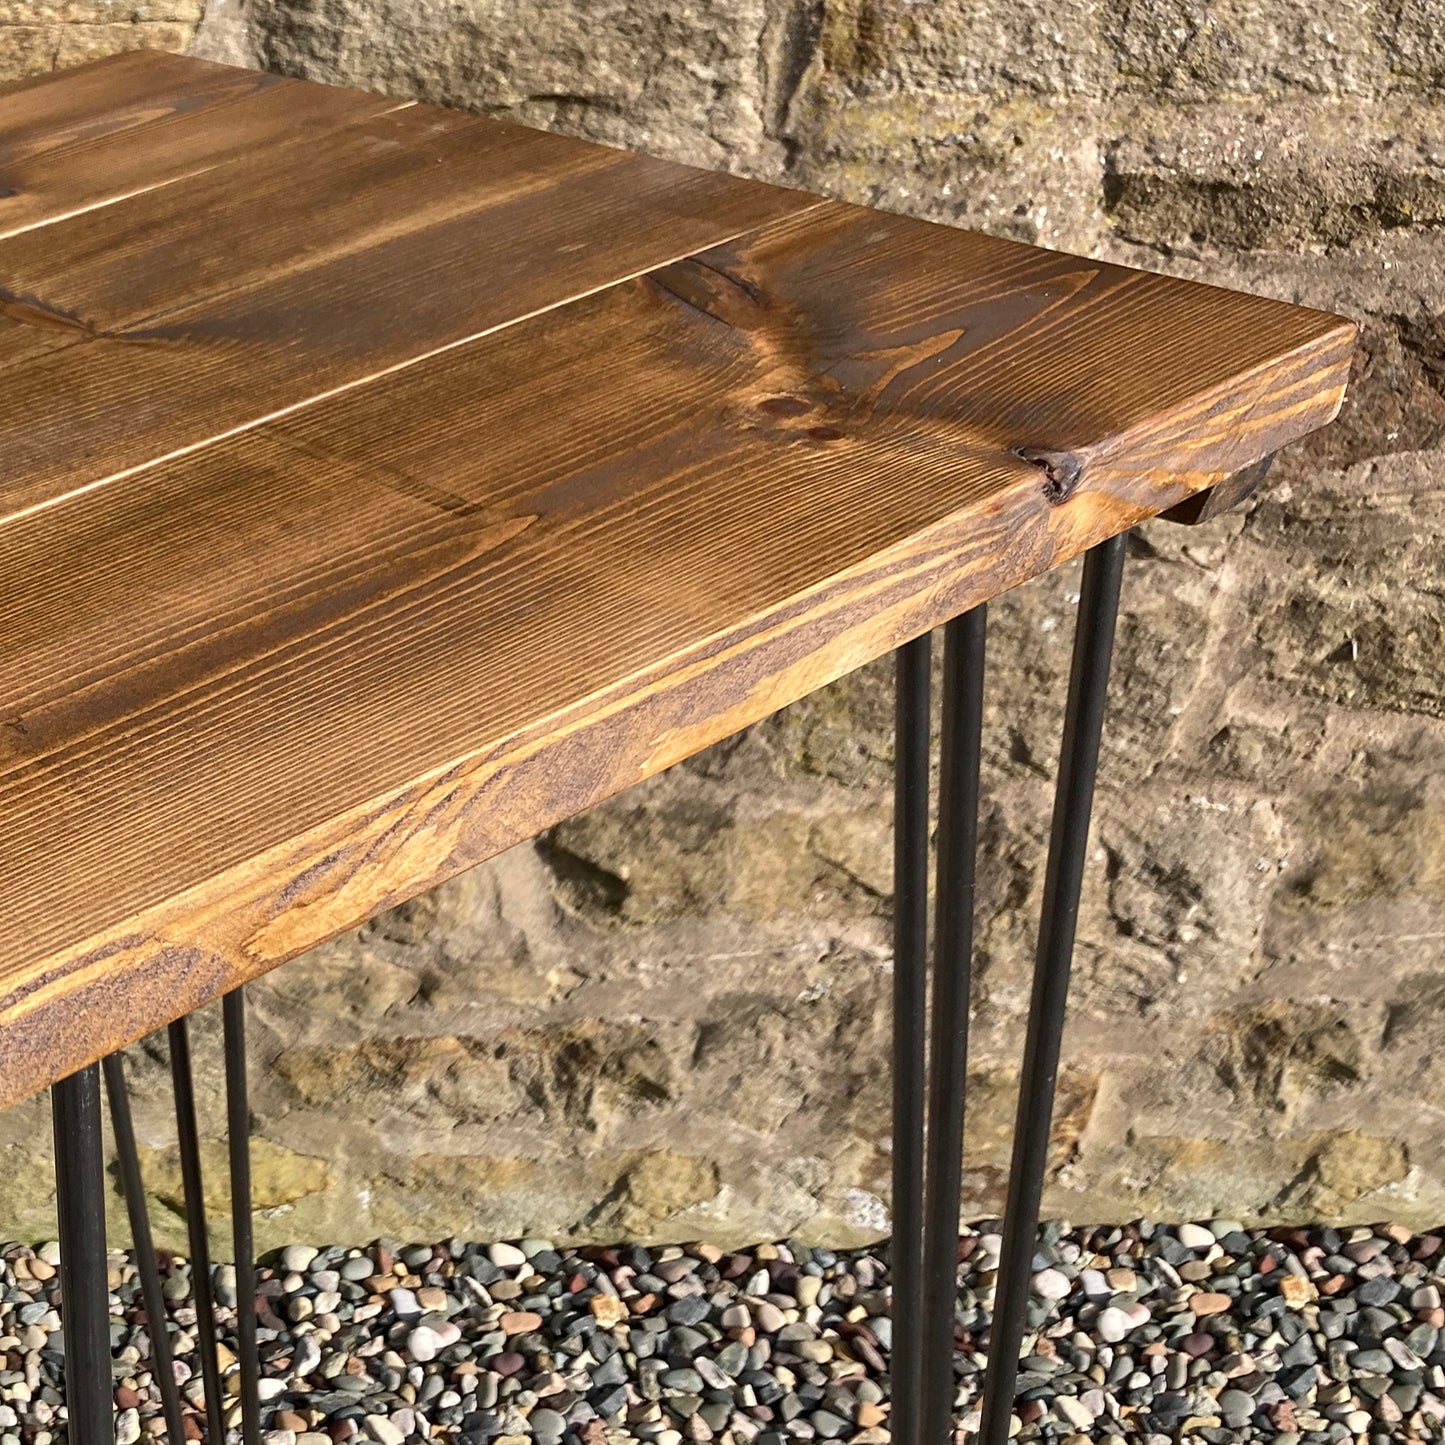 2. Outdoor Rustic-style Poseur Tables